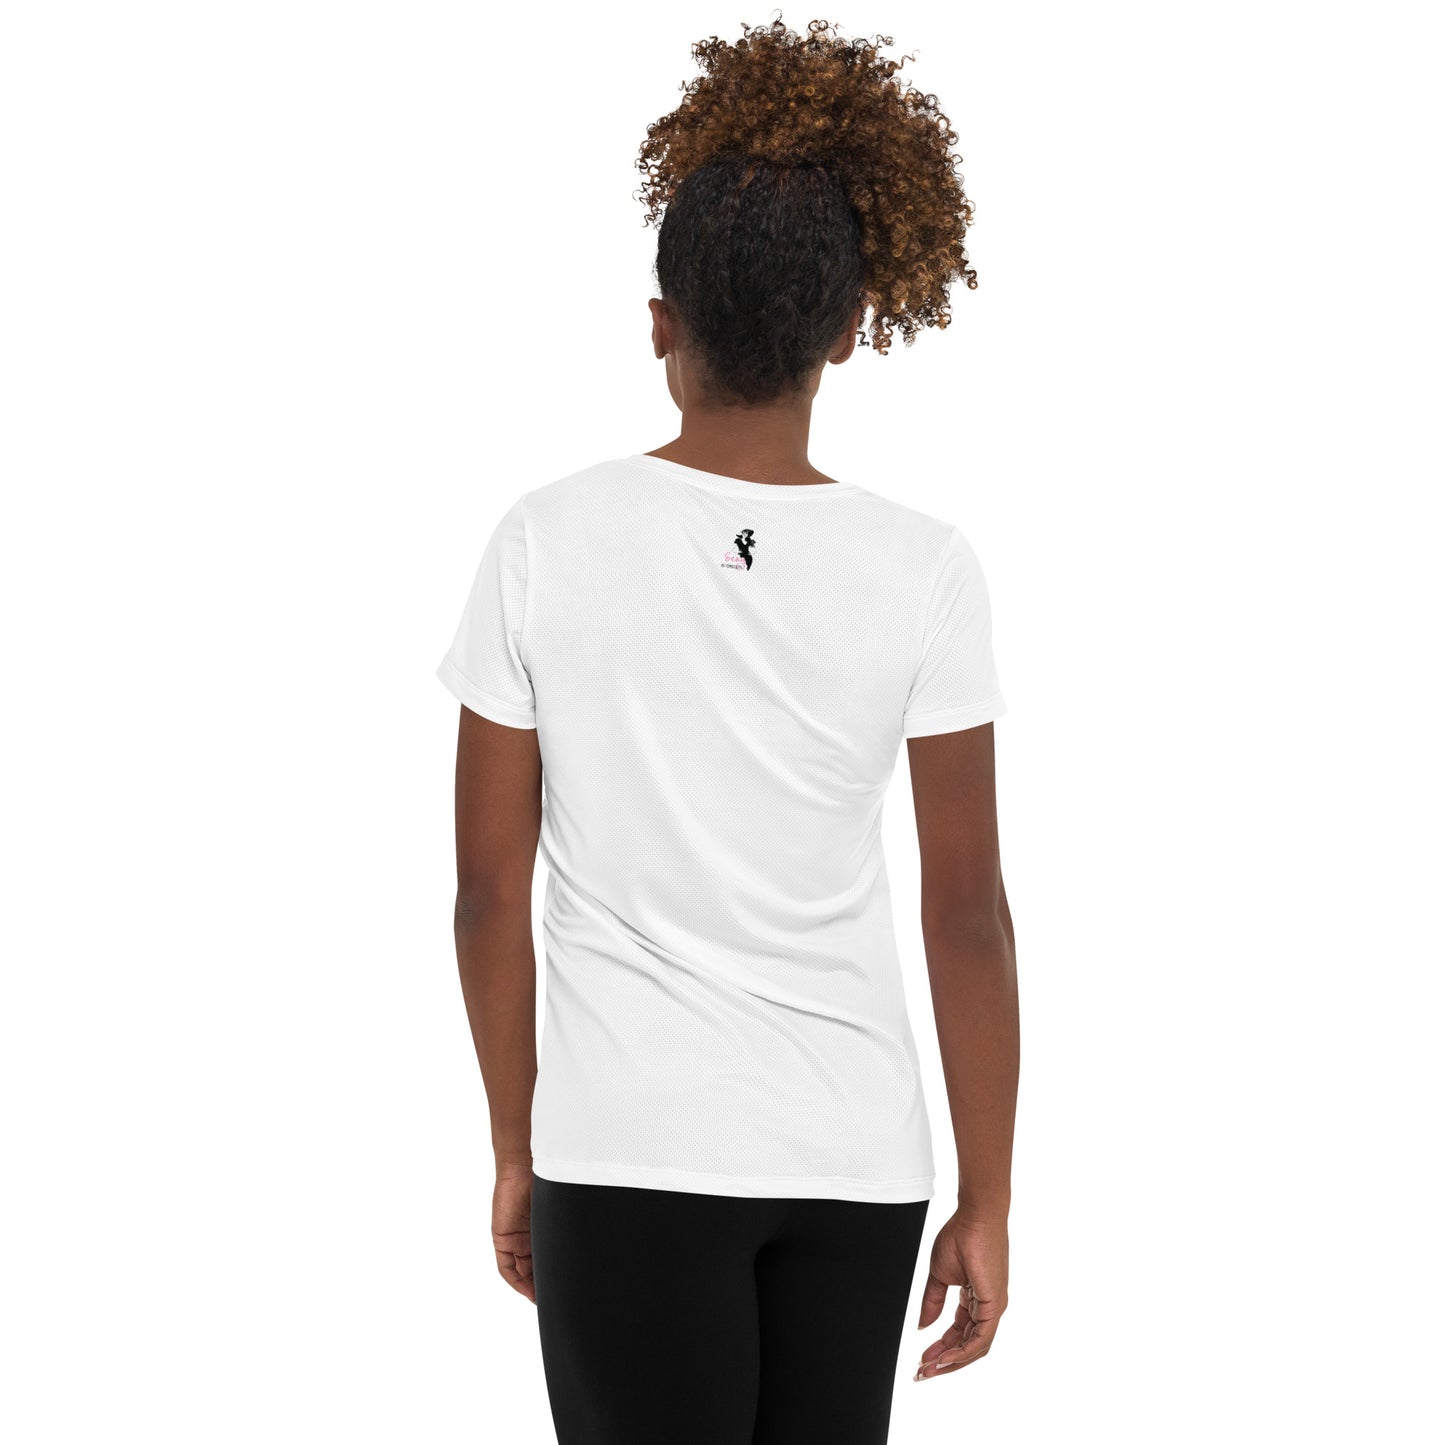 YOU ARE WORTHY - Women's Athletic T-shirt